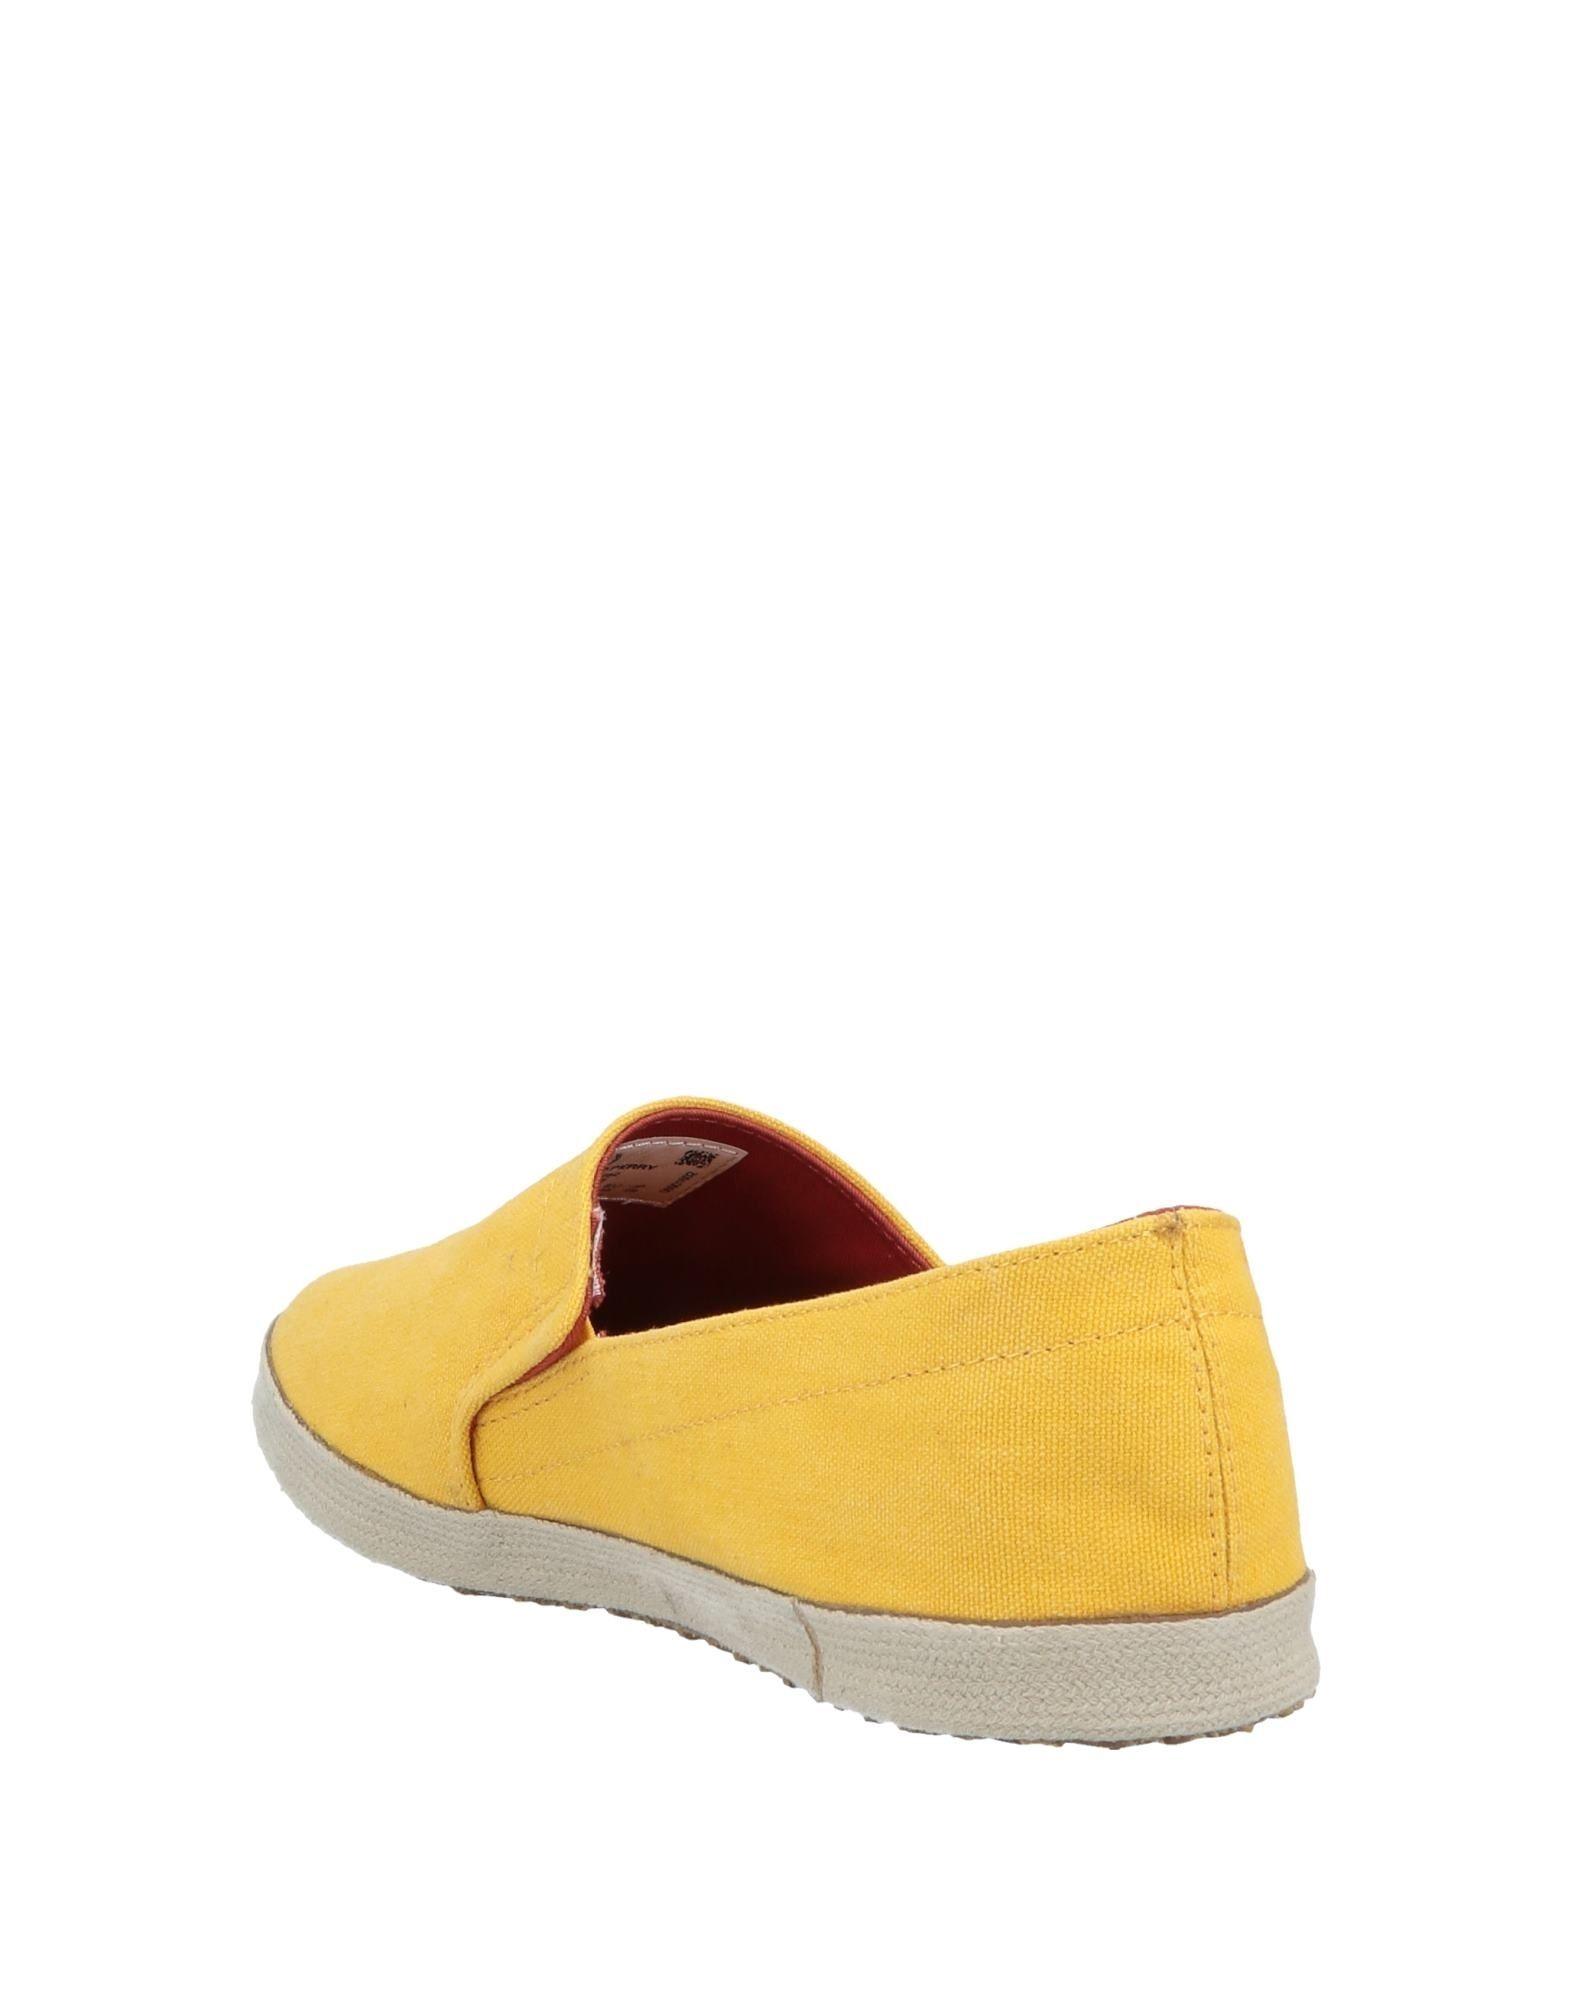 Fred Perry Canvas Espadrilles in Yellow for Men - Lyst